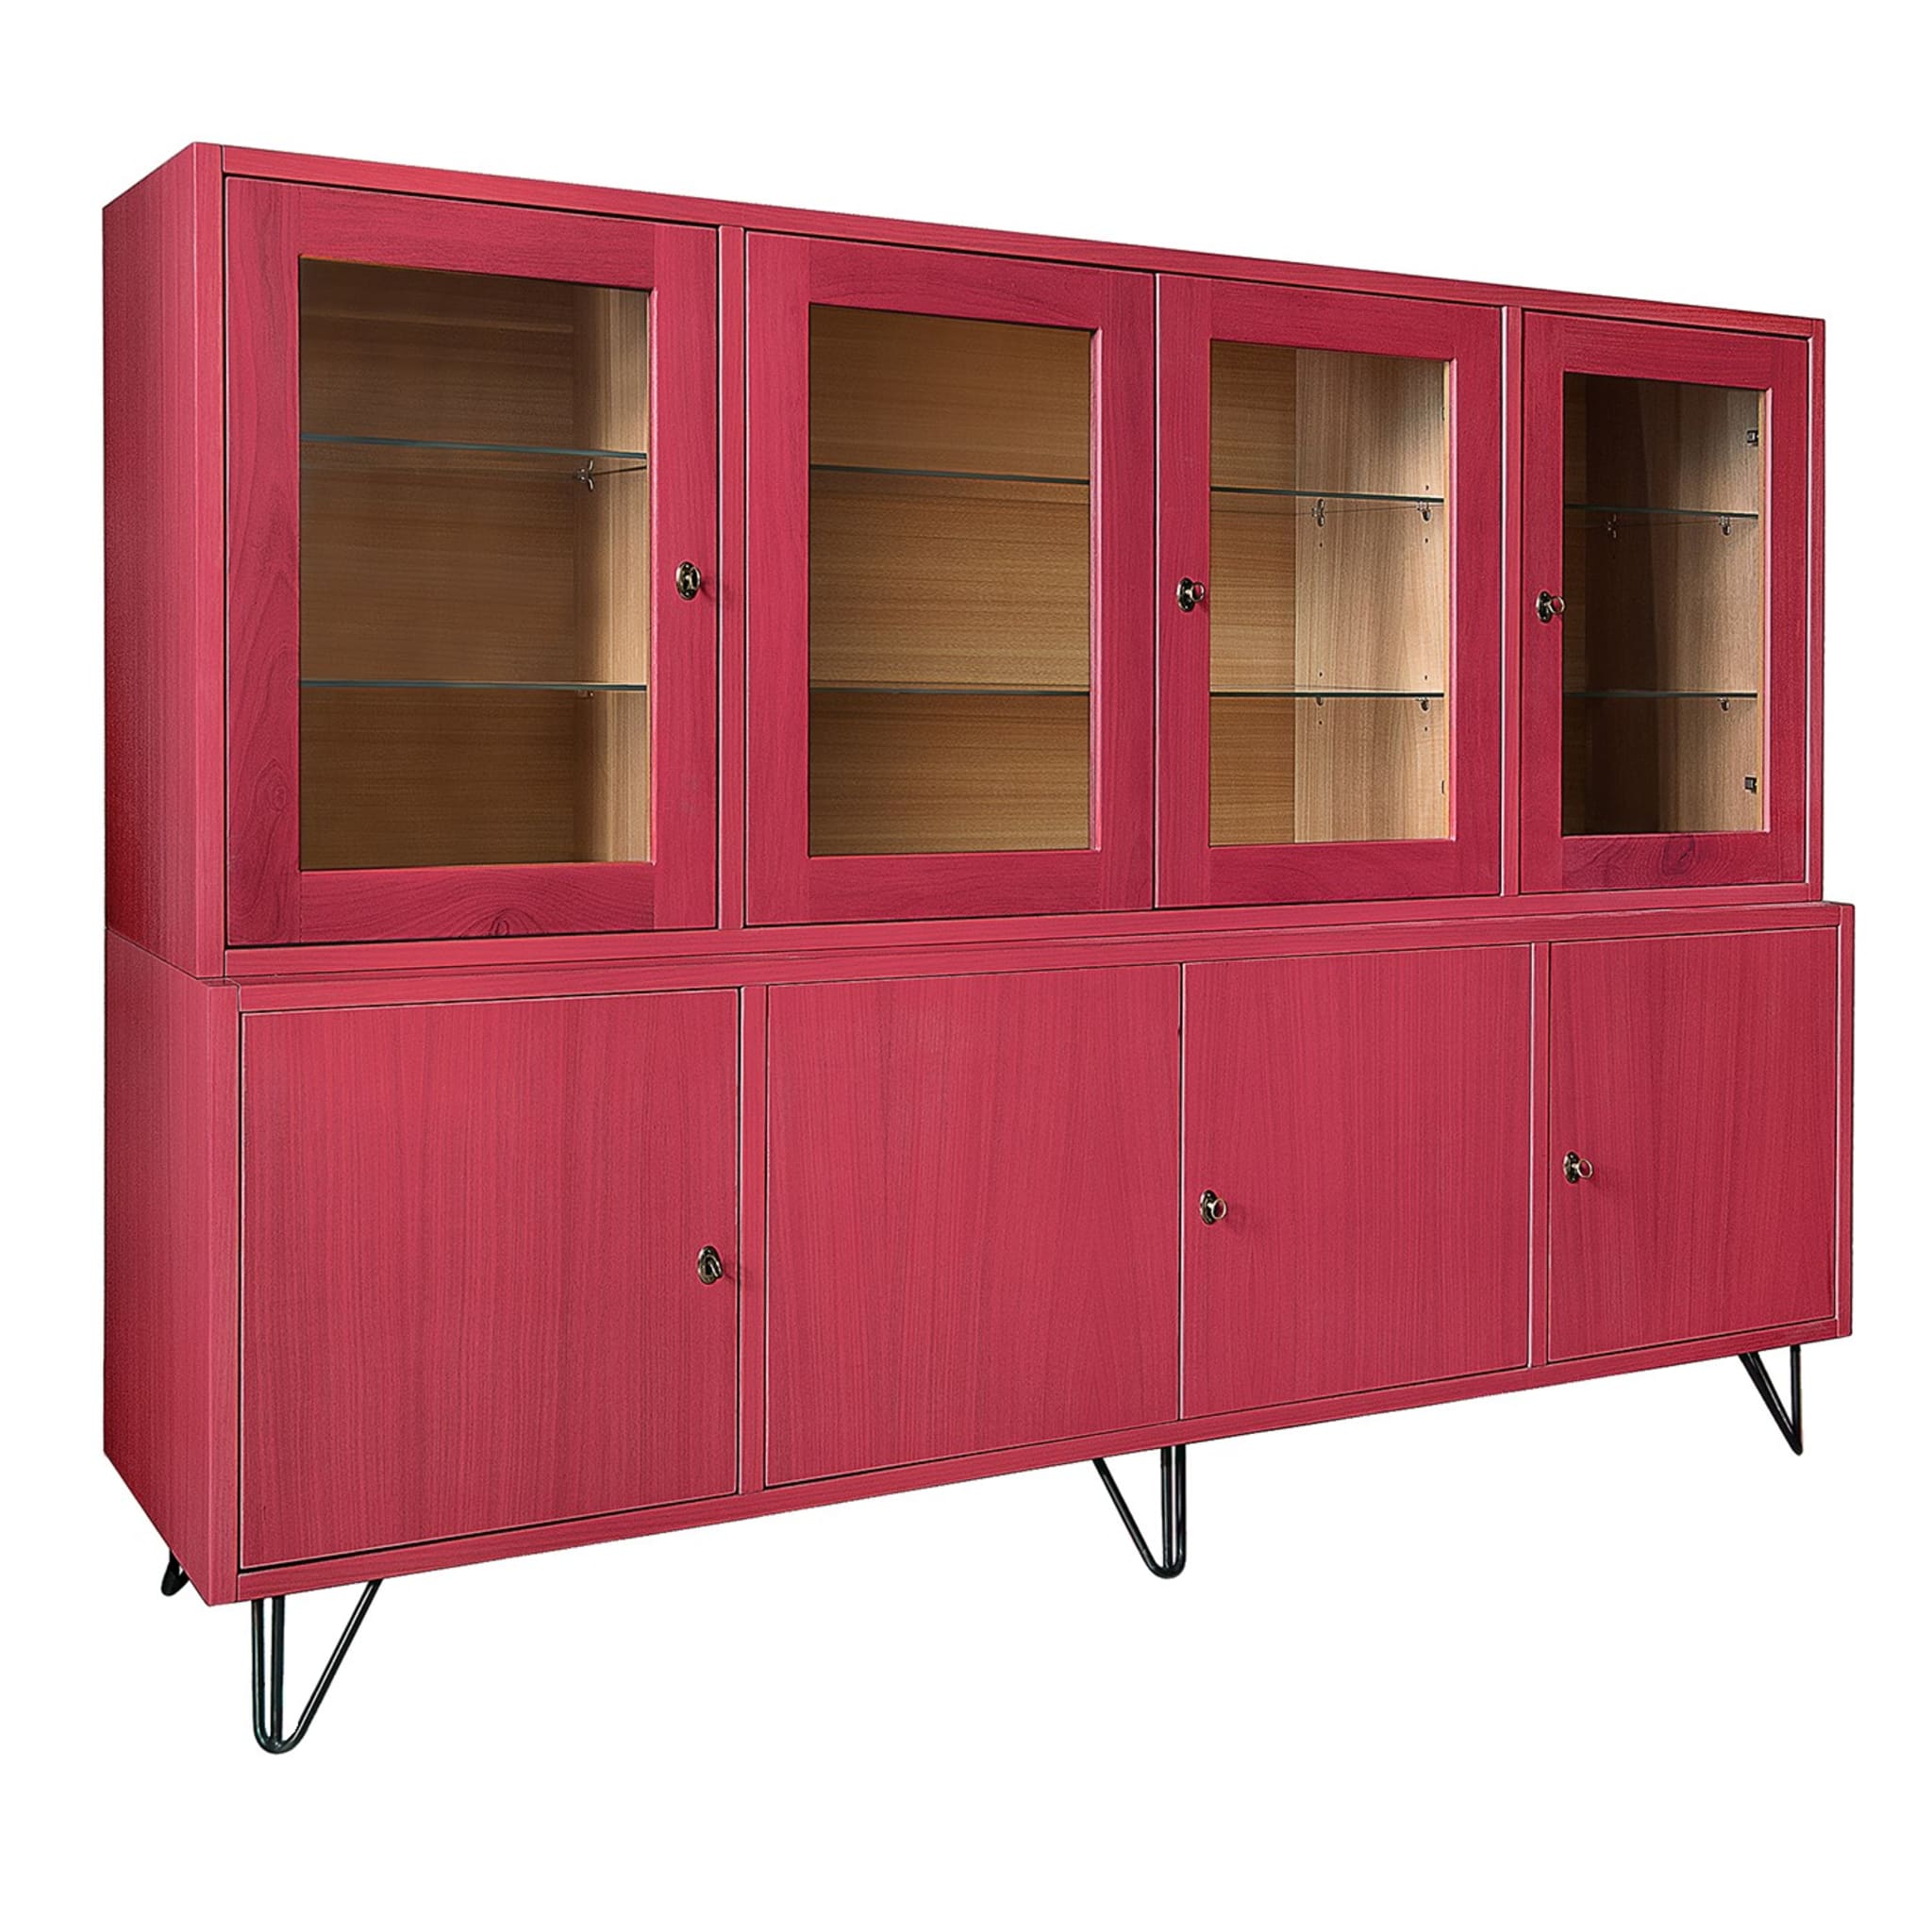 Eroica Red Cabinet by Eugenio Gambella - Main view